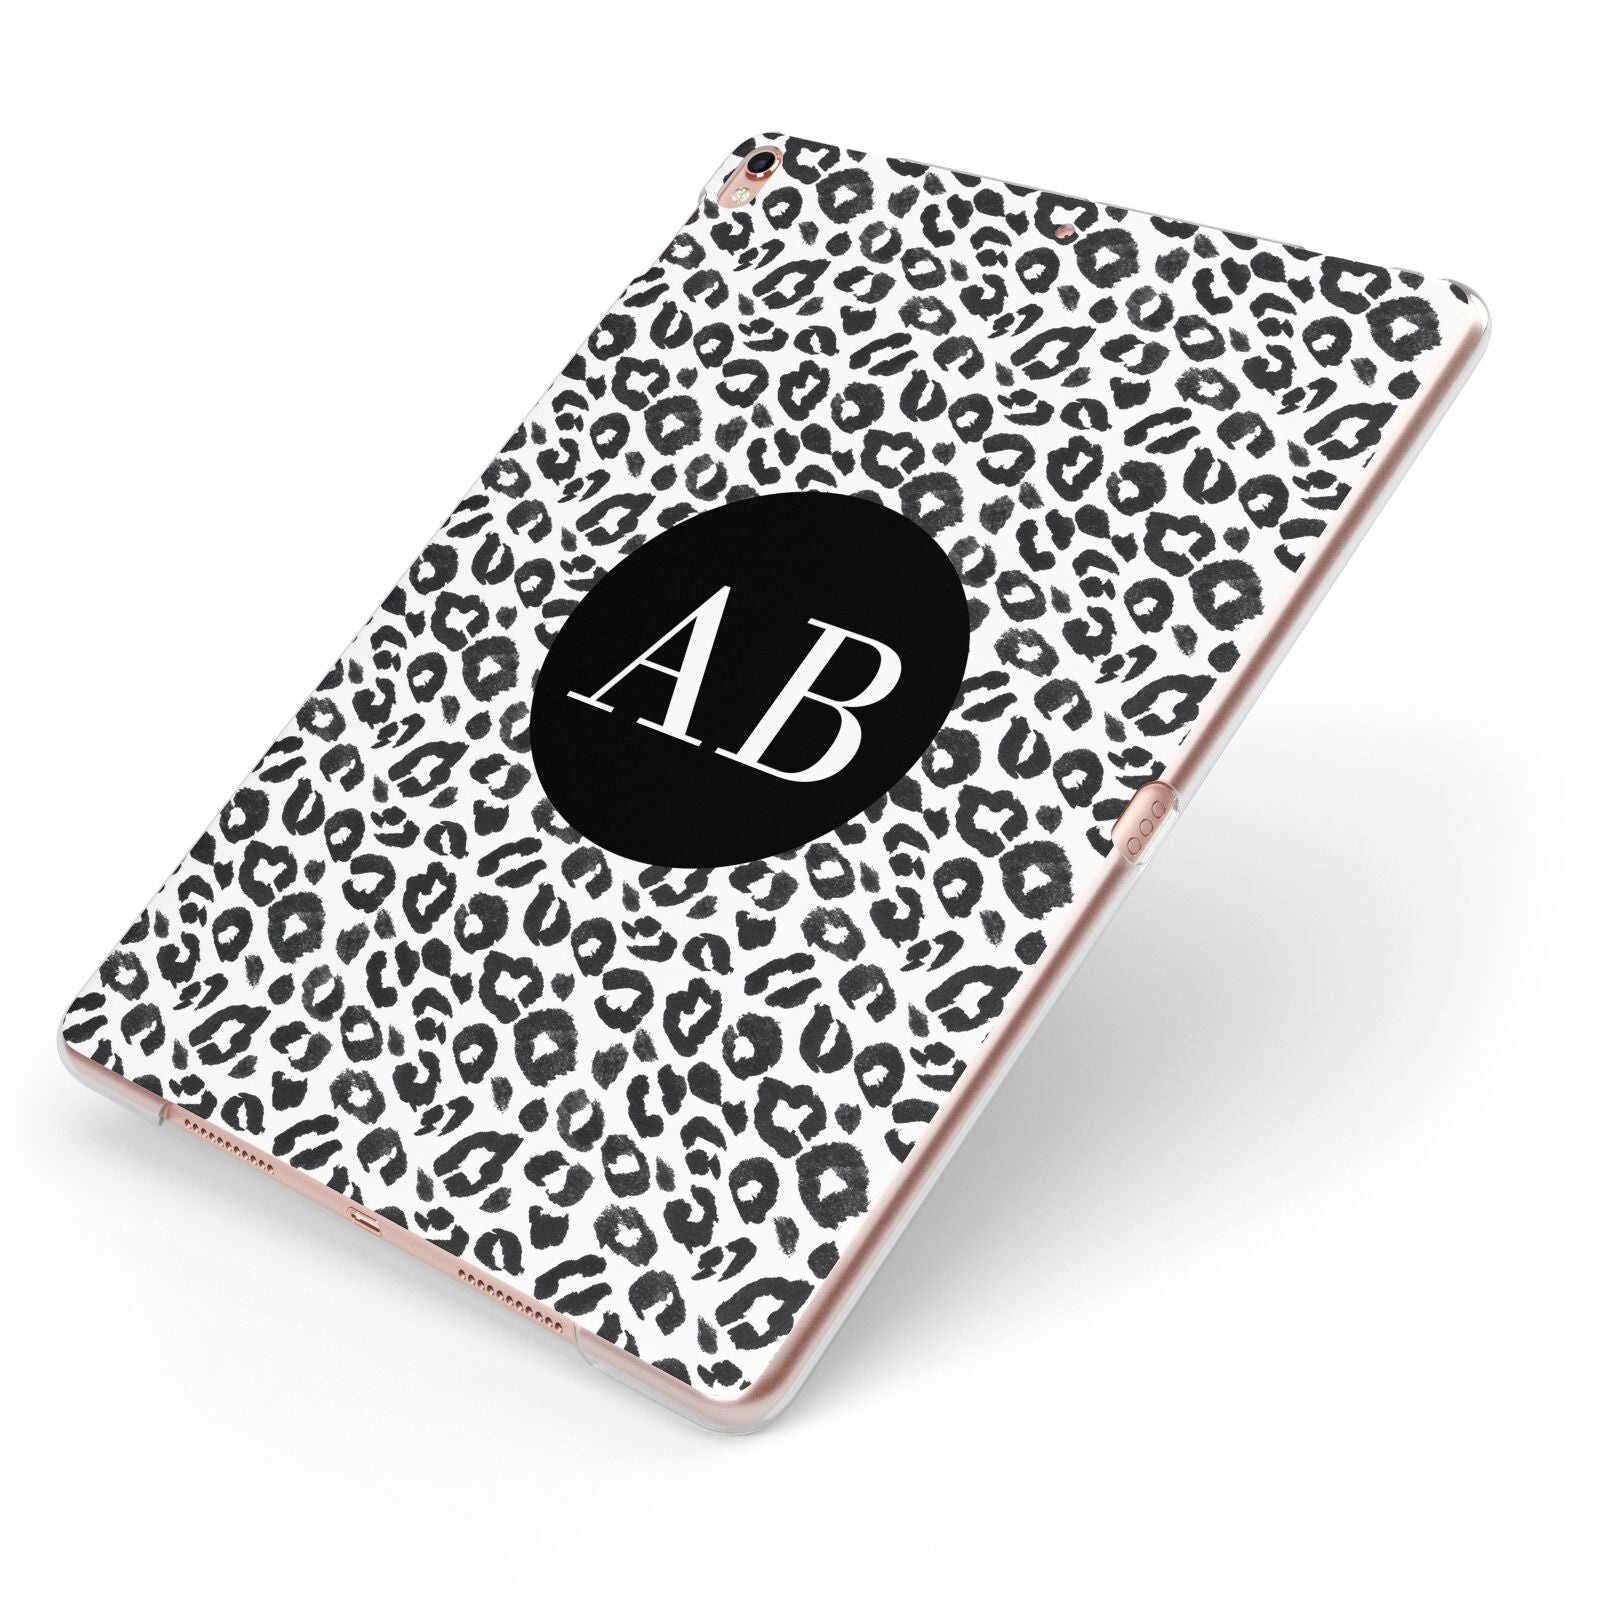 Leopard Print Black and White Apple iPad Case on Rose Gold iPad Side View